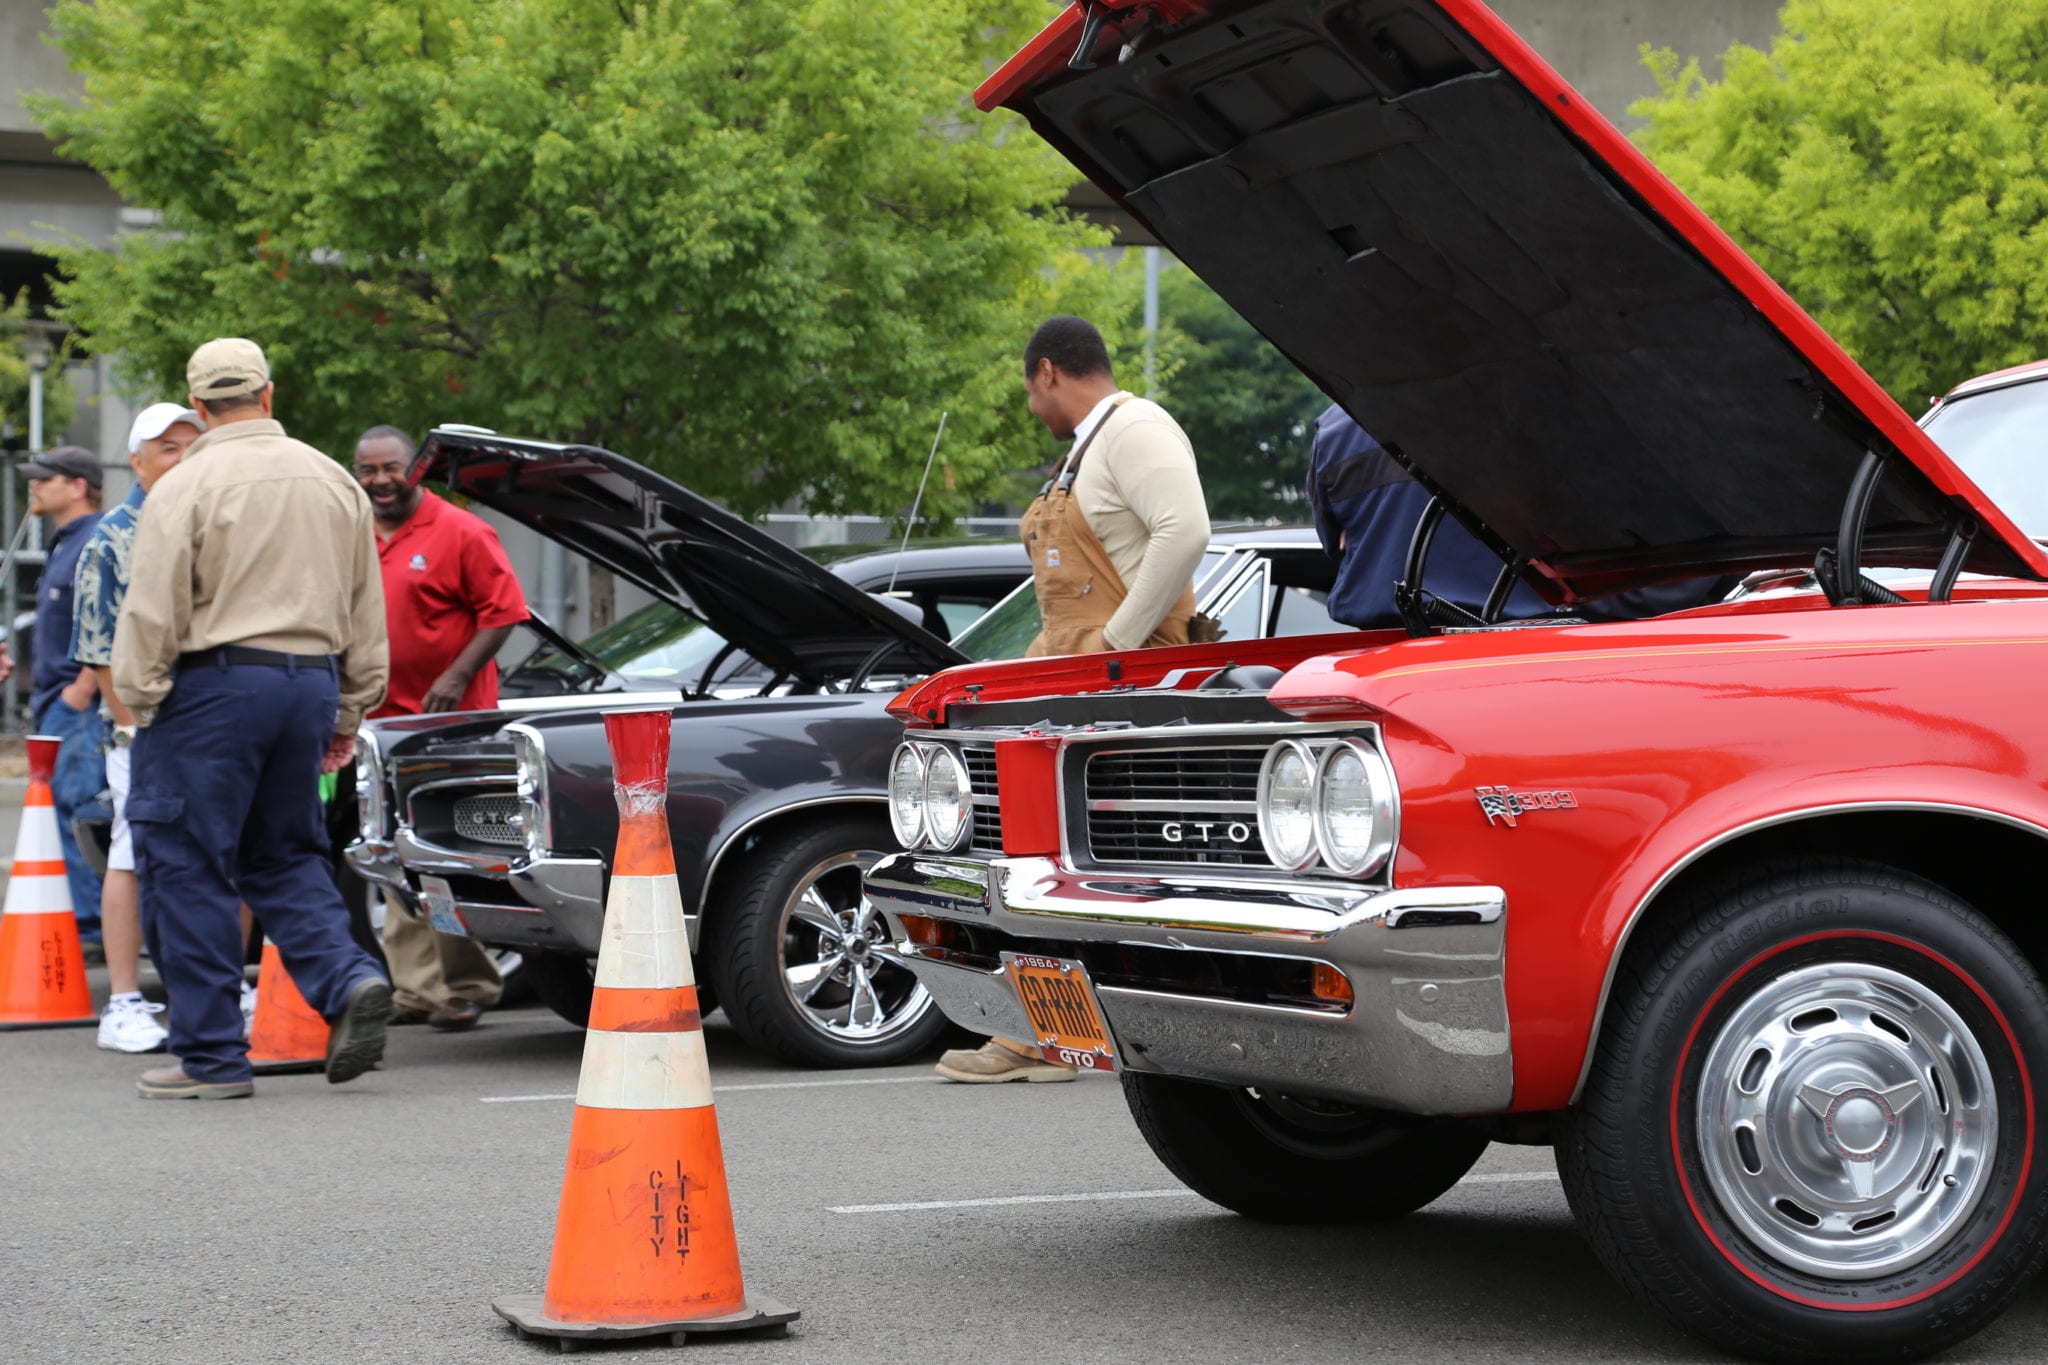 City Light employees participate in the 3rd Annual Rockin' BBQ & Car Show